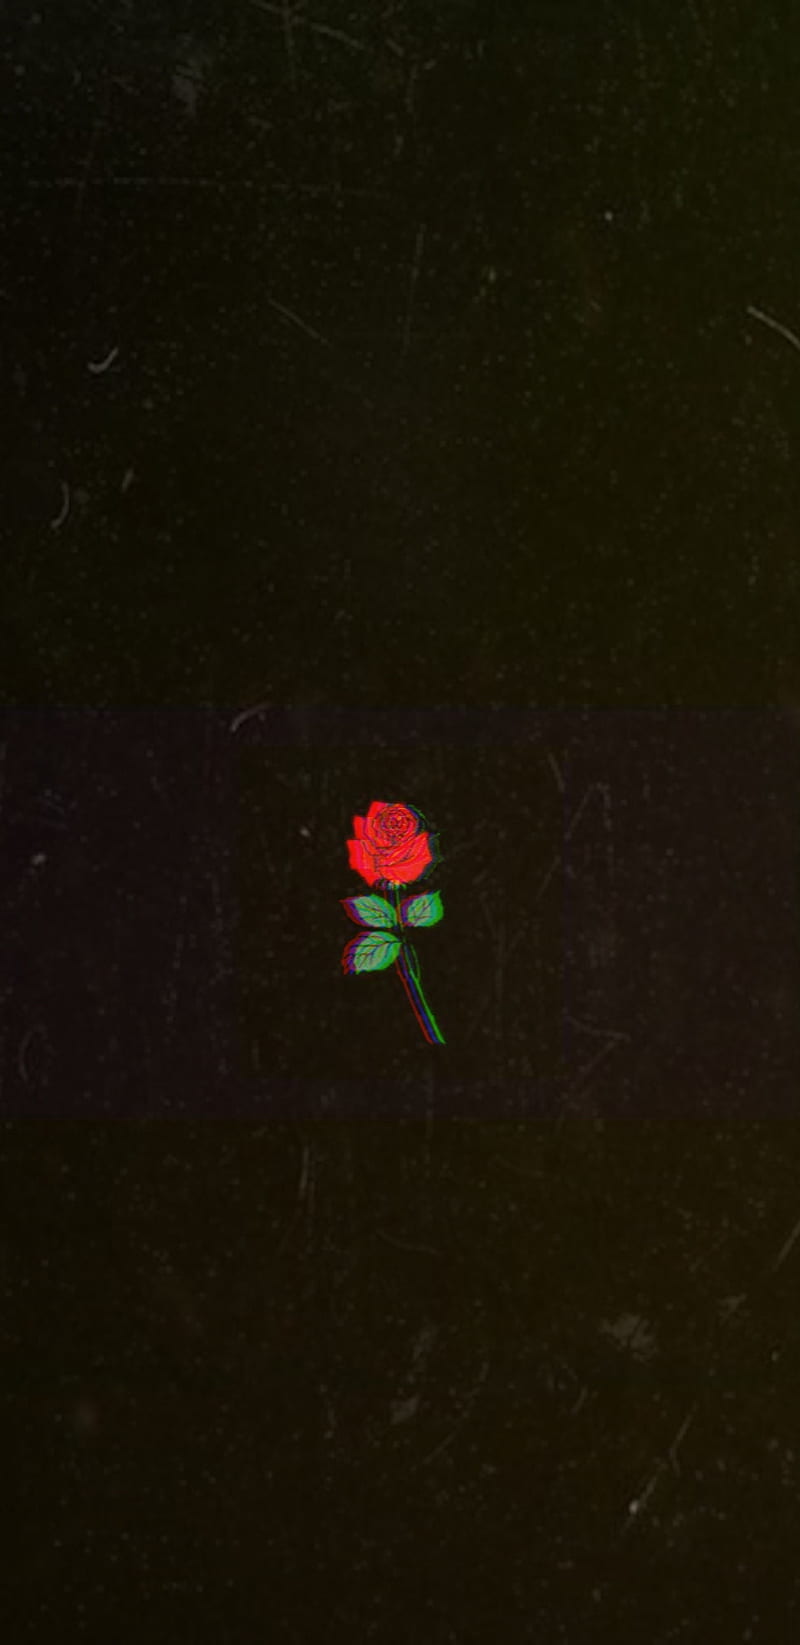 Aesthetic wallpaper of a red rose on a black background - Glitch